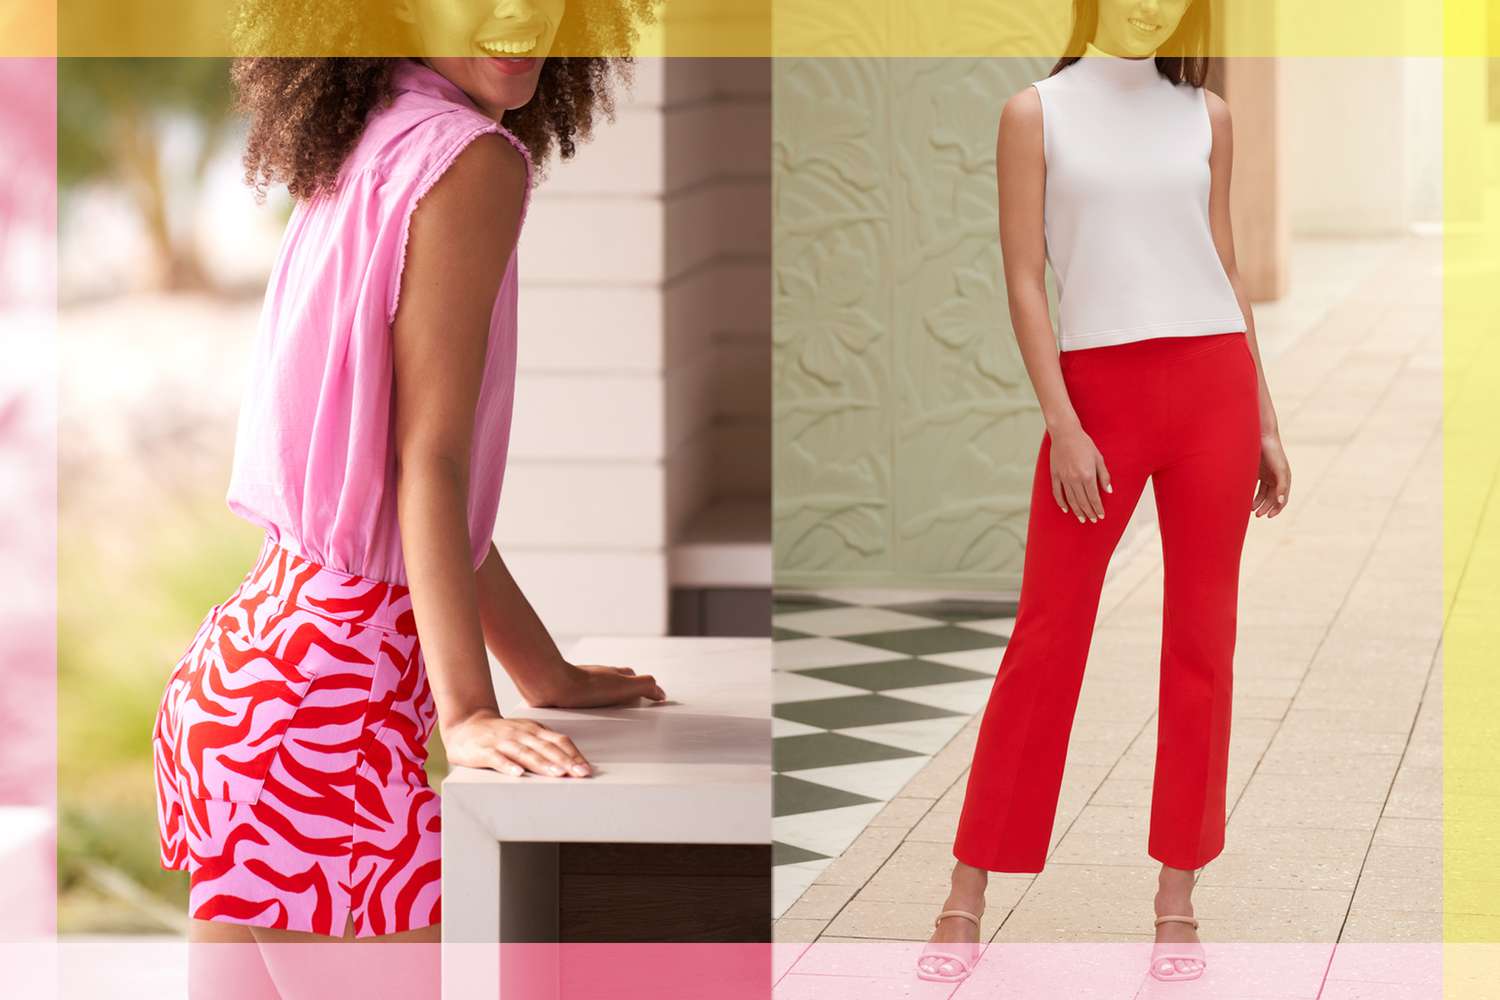 The New Spanx Pants and Shorts Are Made for On-the-Go